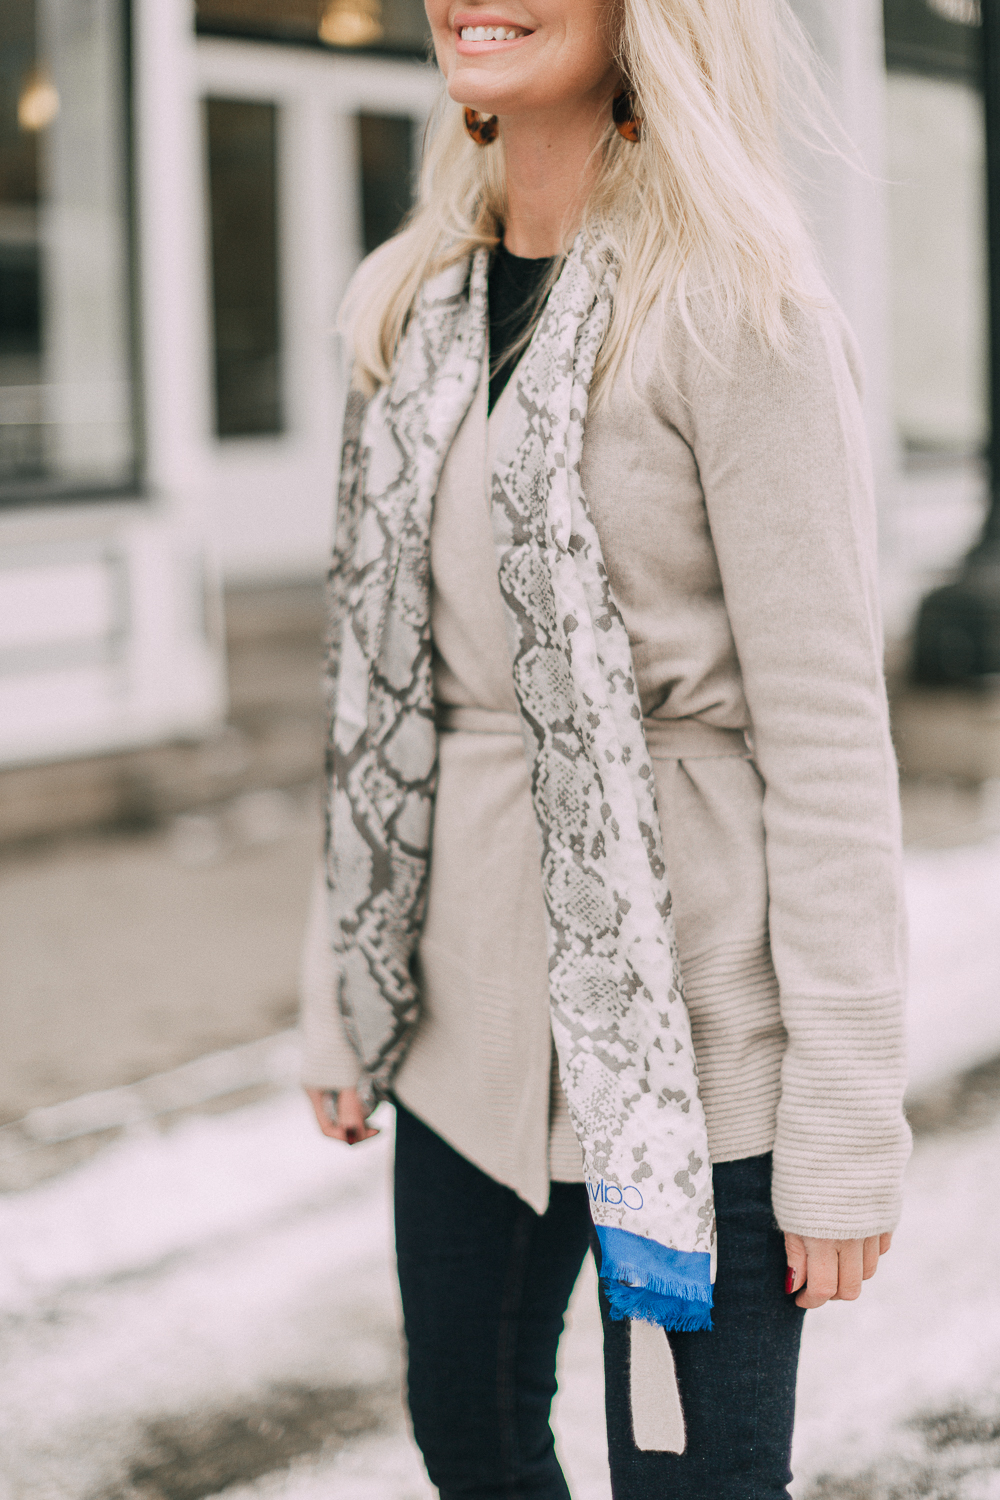 wardrobe staples your closet needs including a black cashmere crewneck sweater and high rise dark wash skinny jeans both from Walmart paired with a cashmere cardigan and python scarf by Calvin Klein